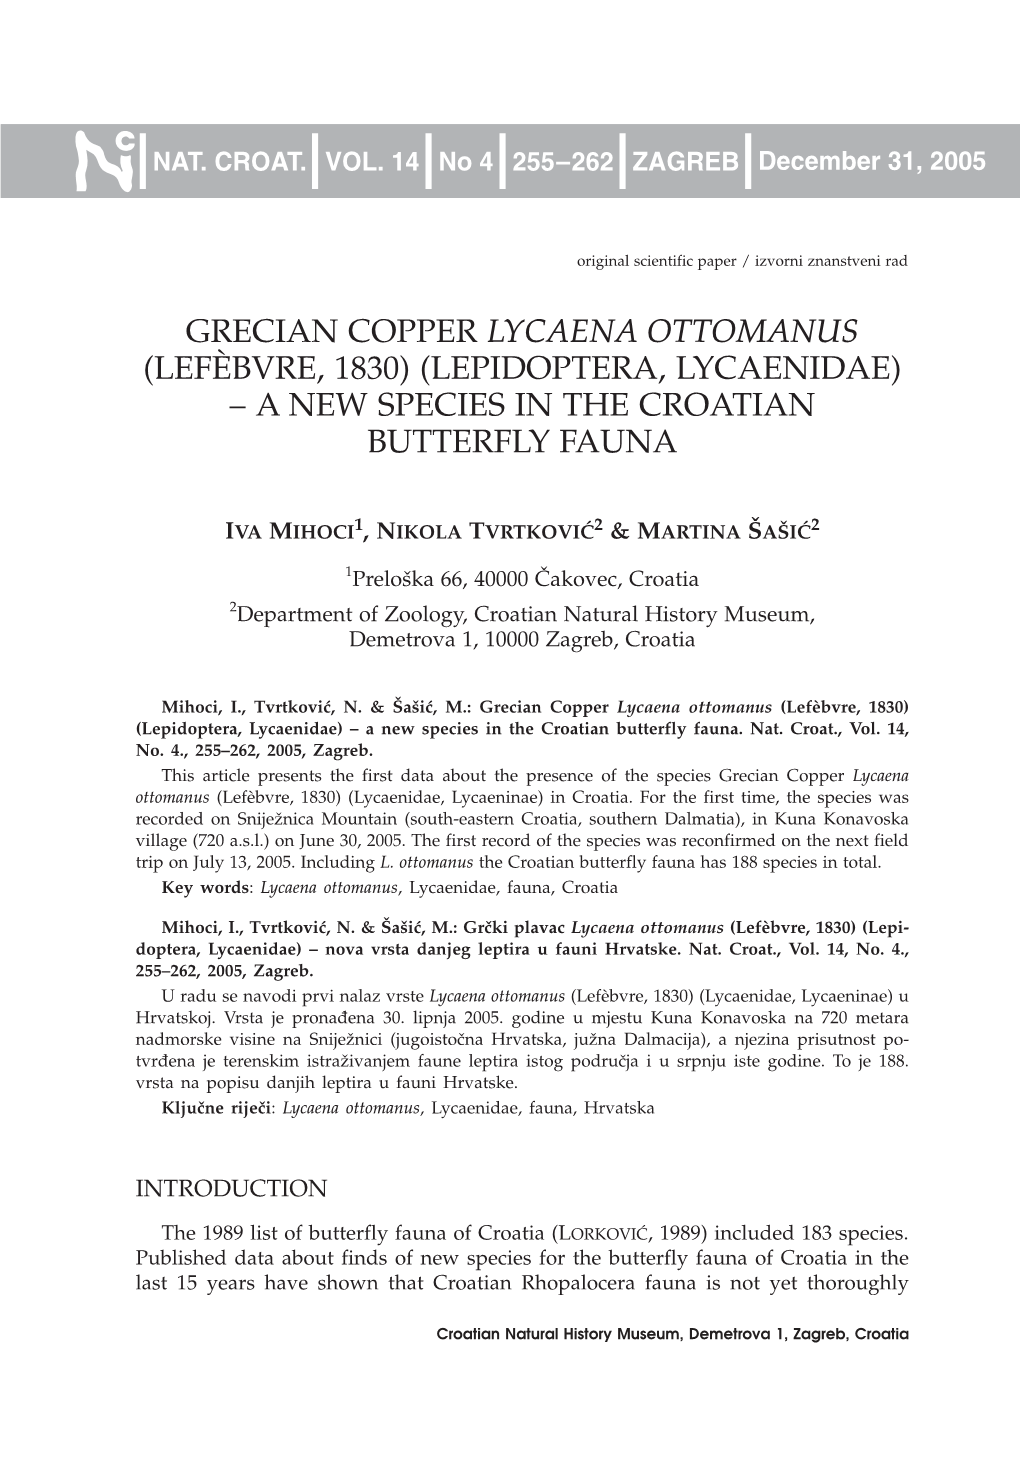 Grecian Copper Lycaena Ottomanus (Lefèbvre, 1830) (Lepidoptera, Lycaenidae) – a New Species in the Croatian Butterfly Fauna